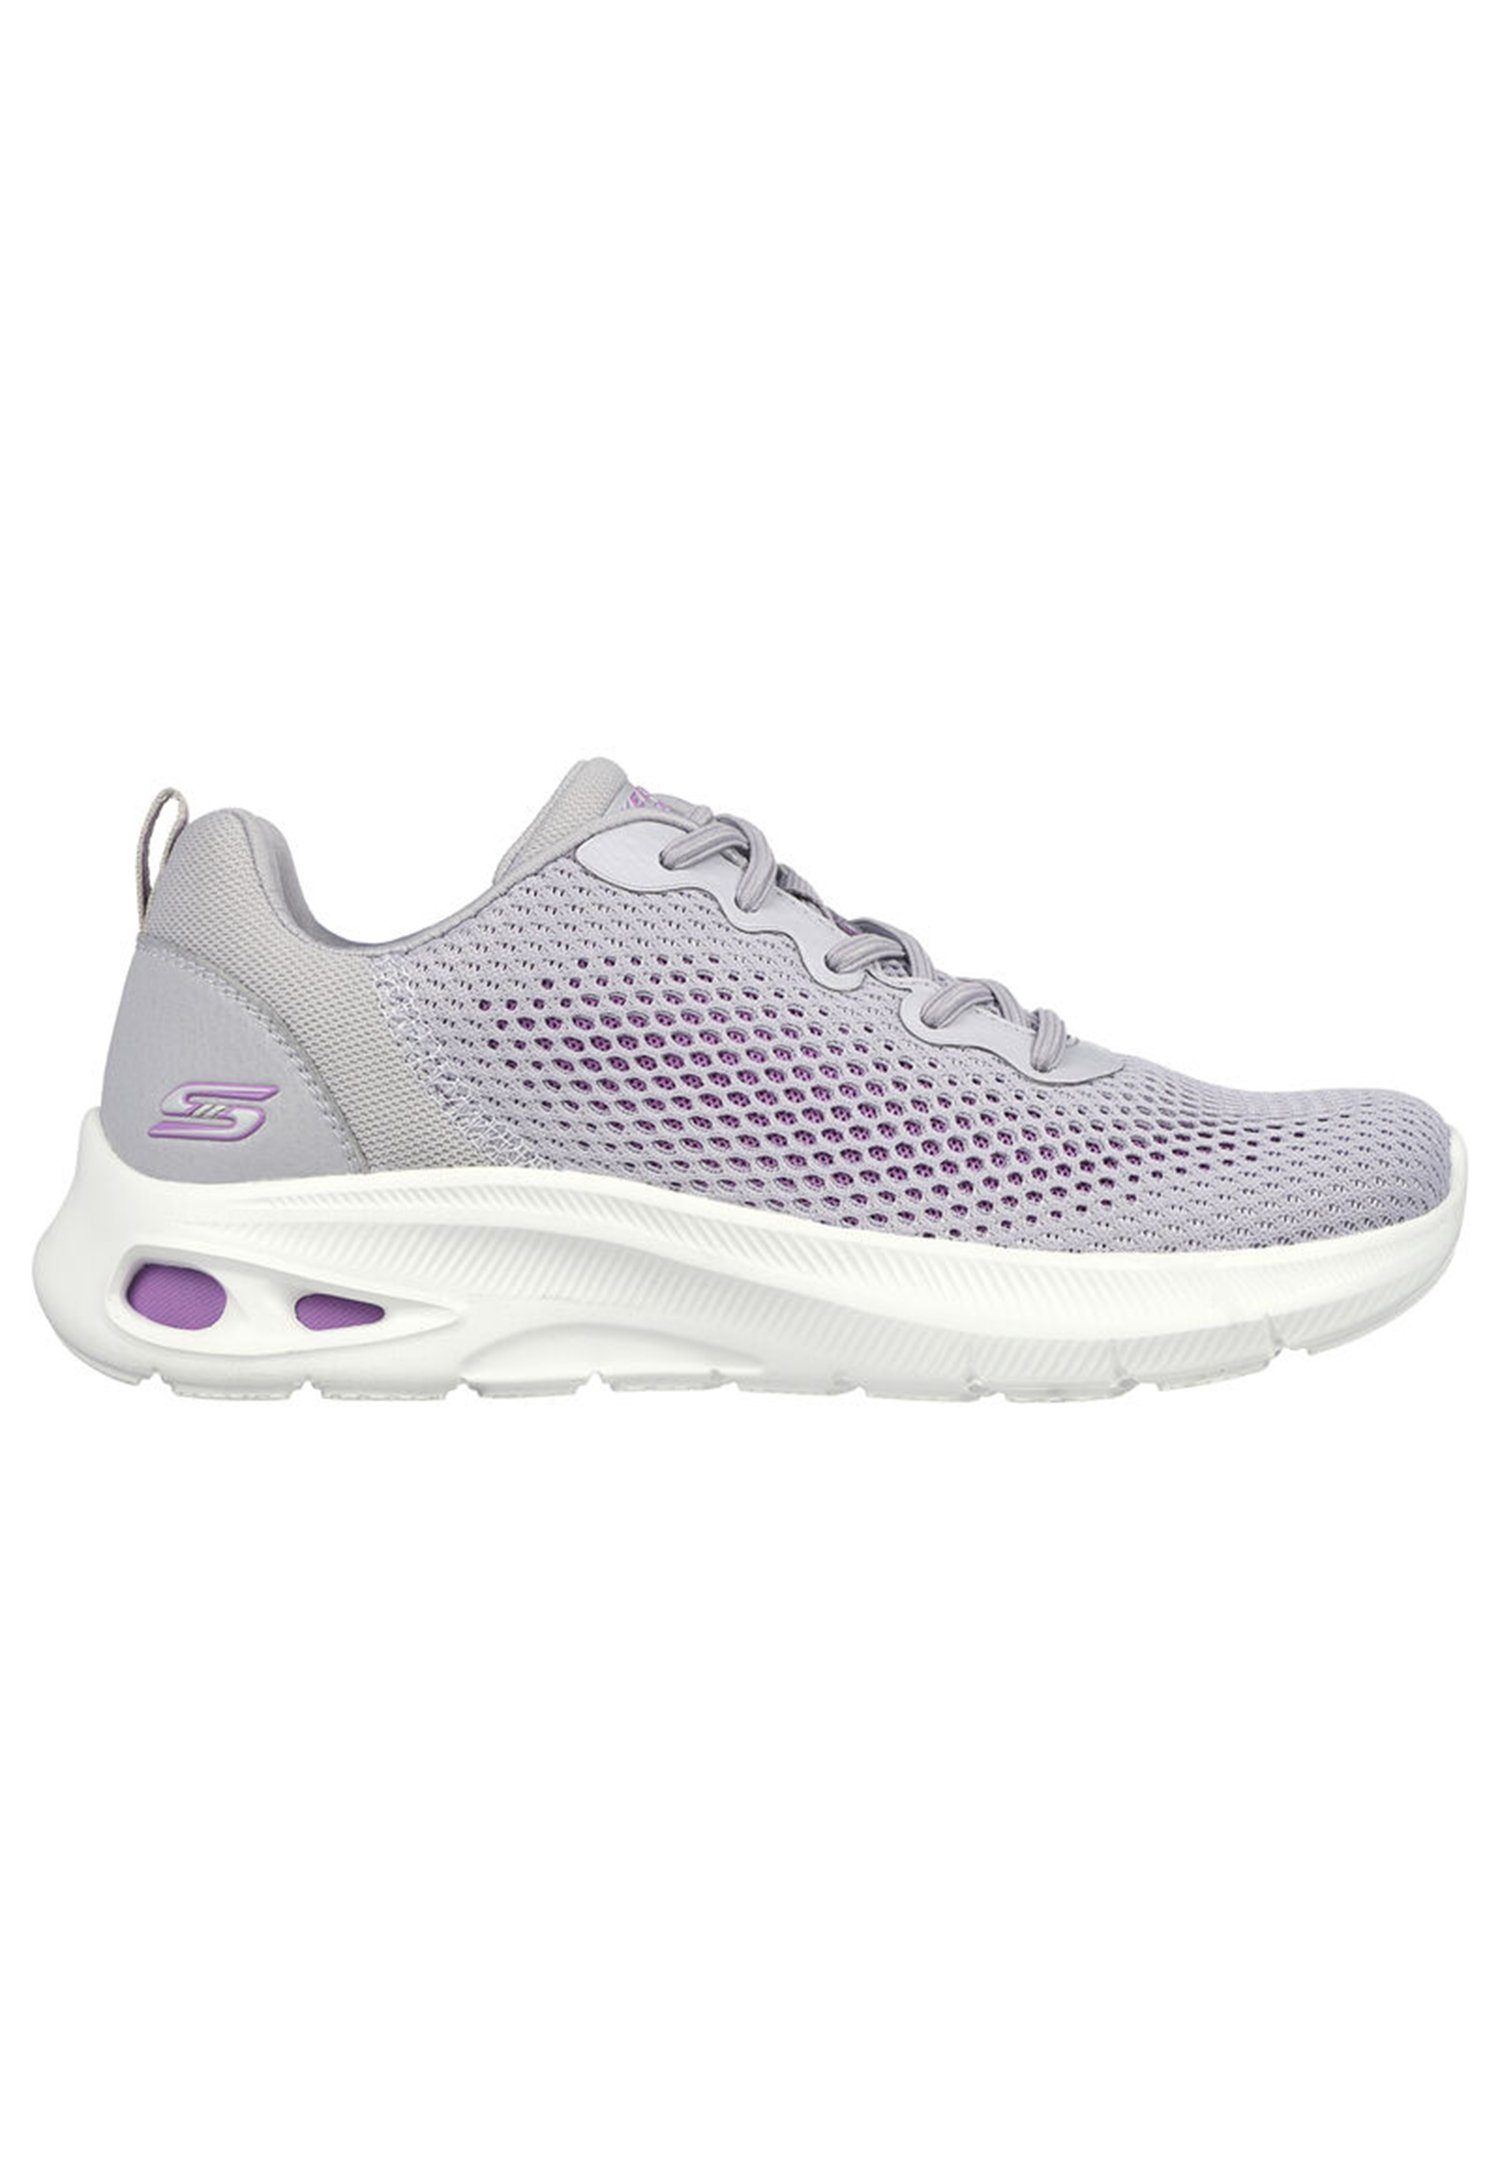 Skechers BOBS UNITY-HINT OF COLOR Sneaker